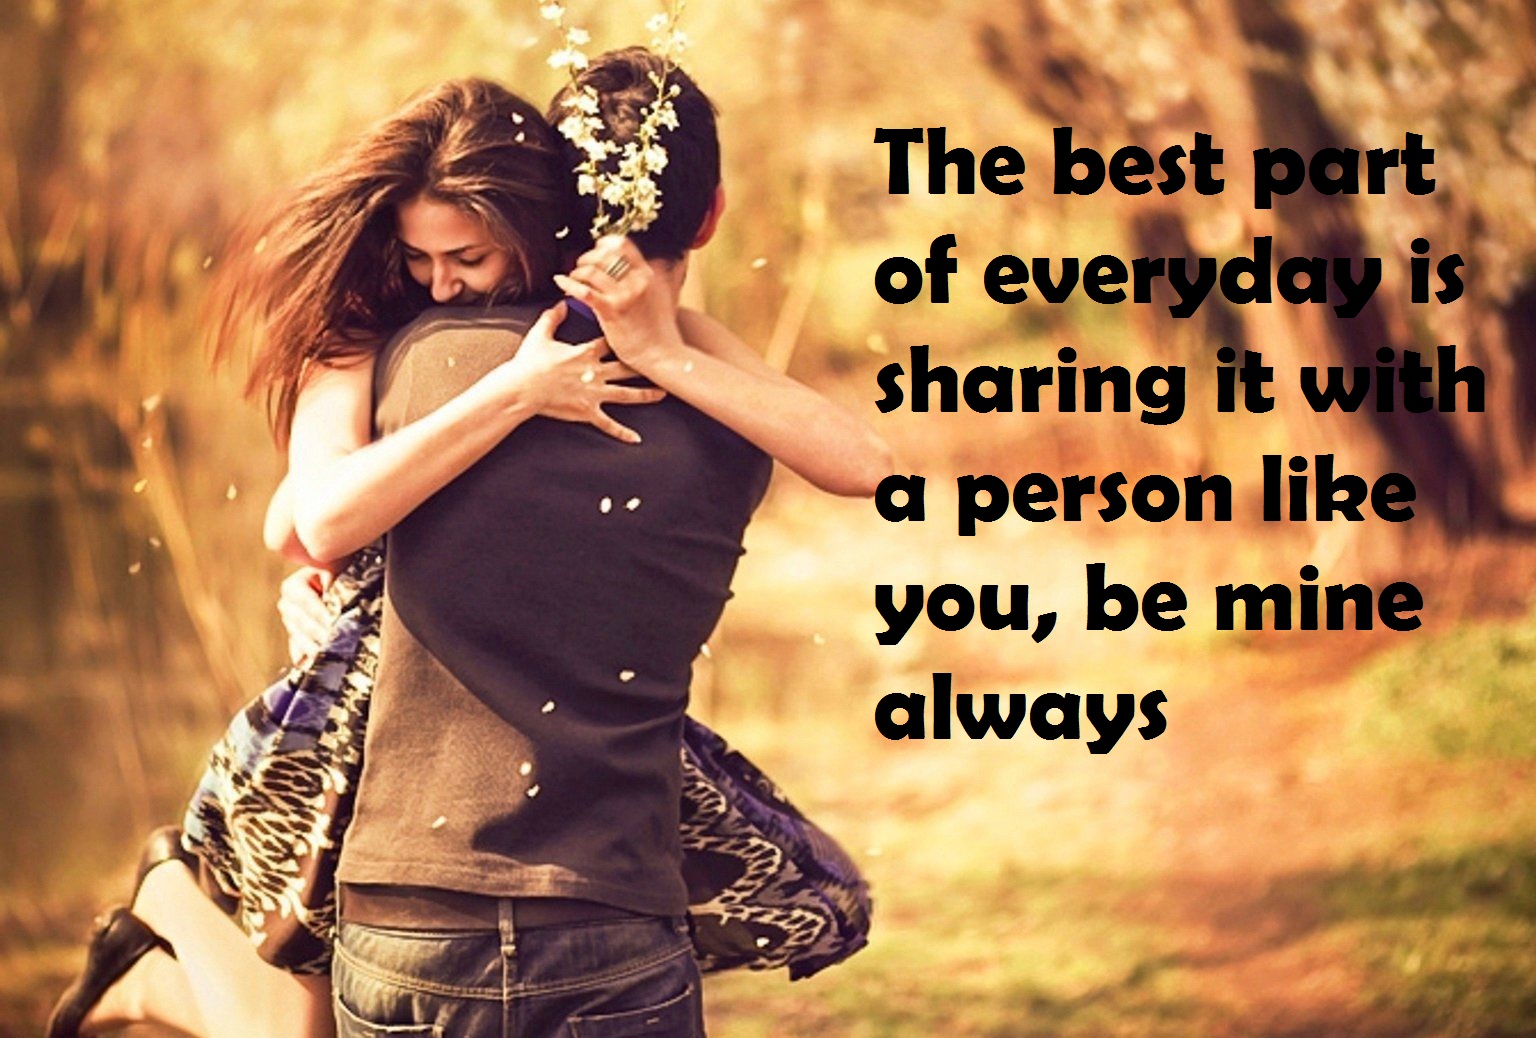 An Incredible Assortment of Romantic Love Quote Images in Full 4K ...